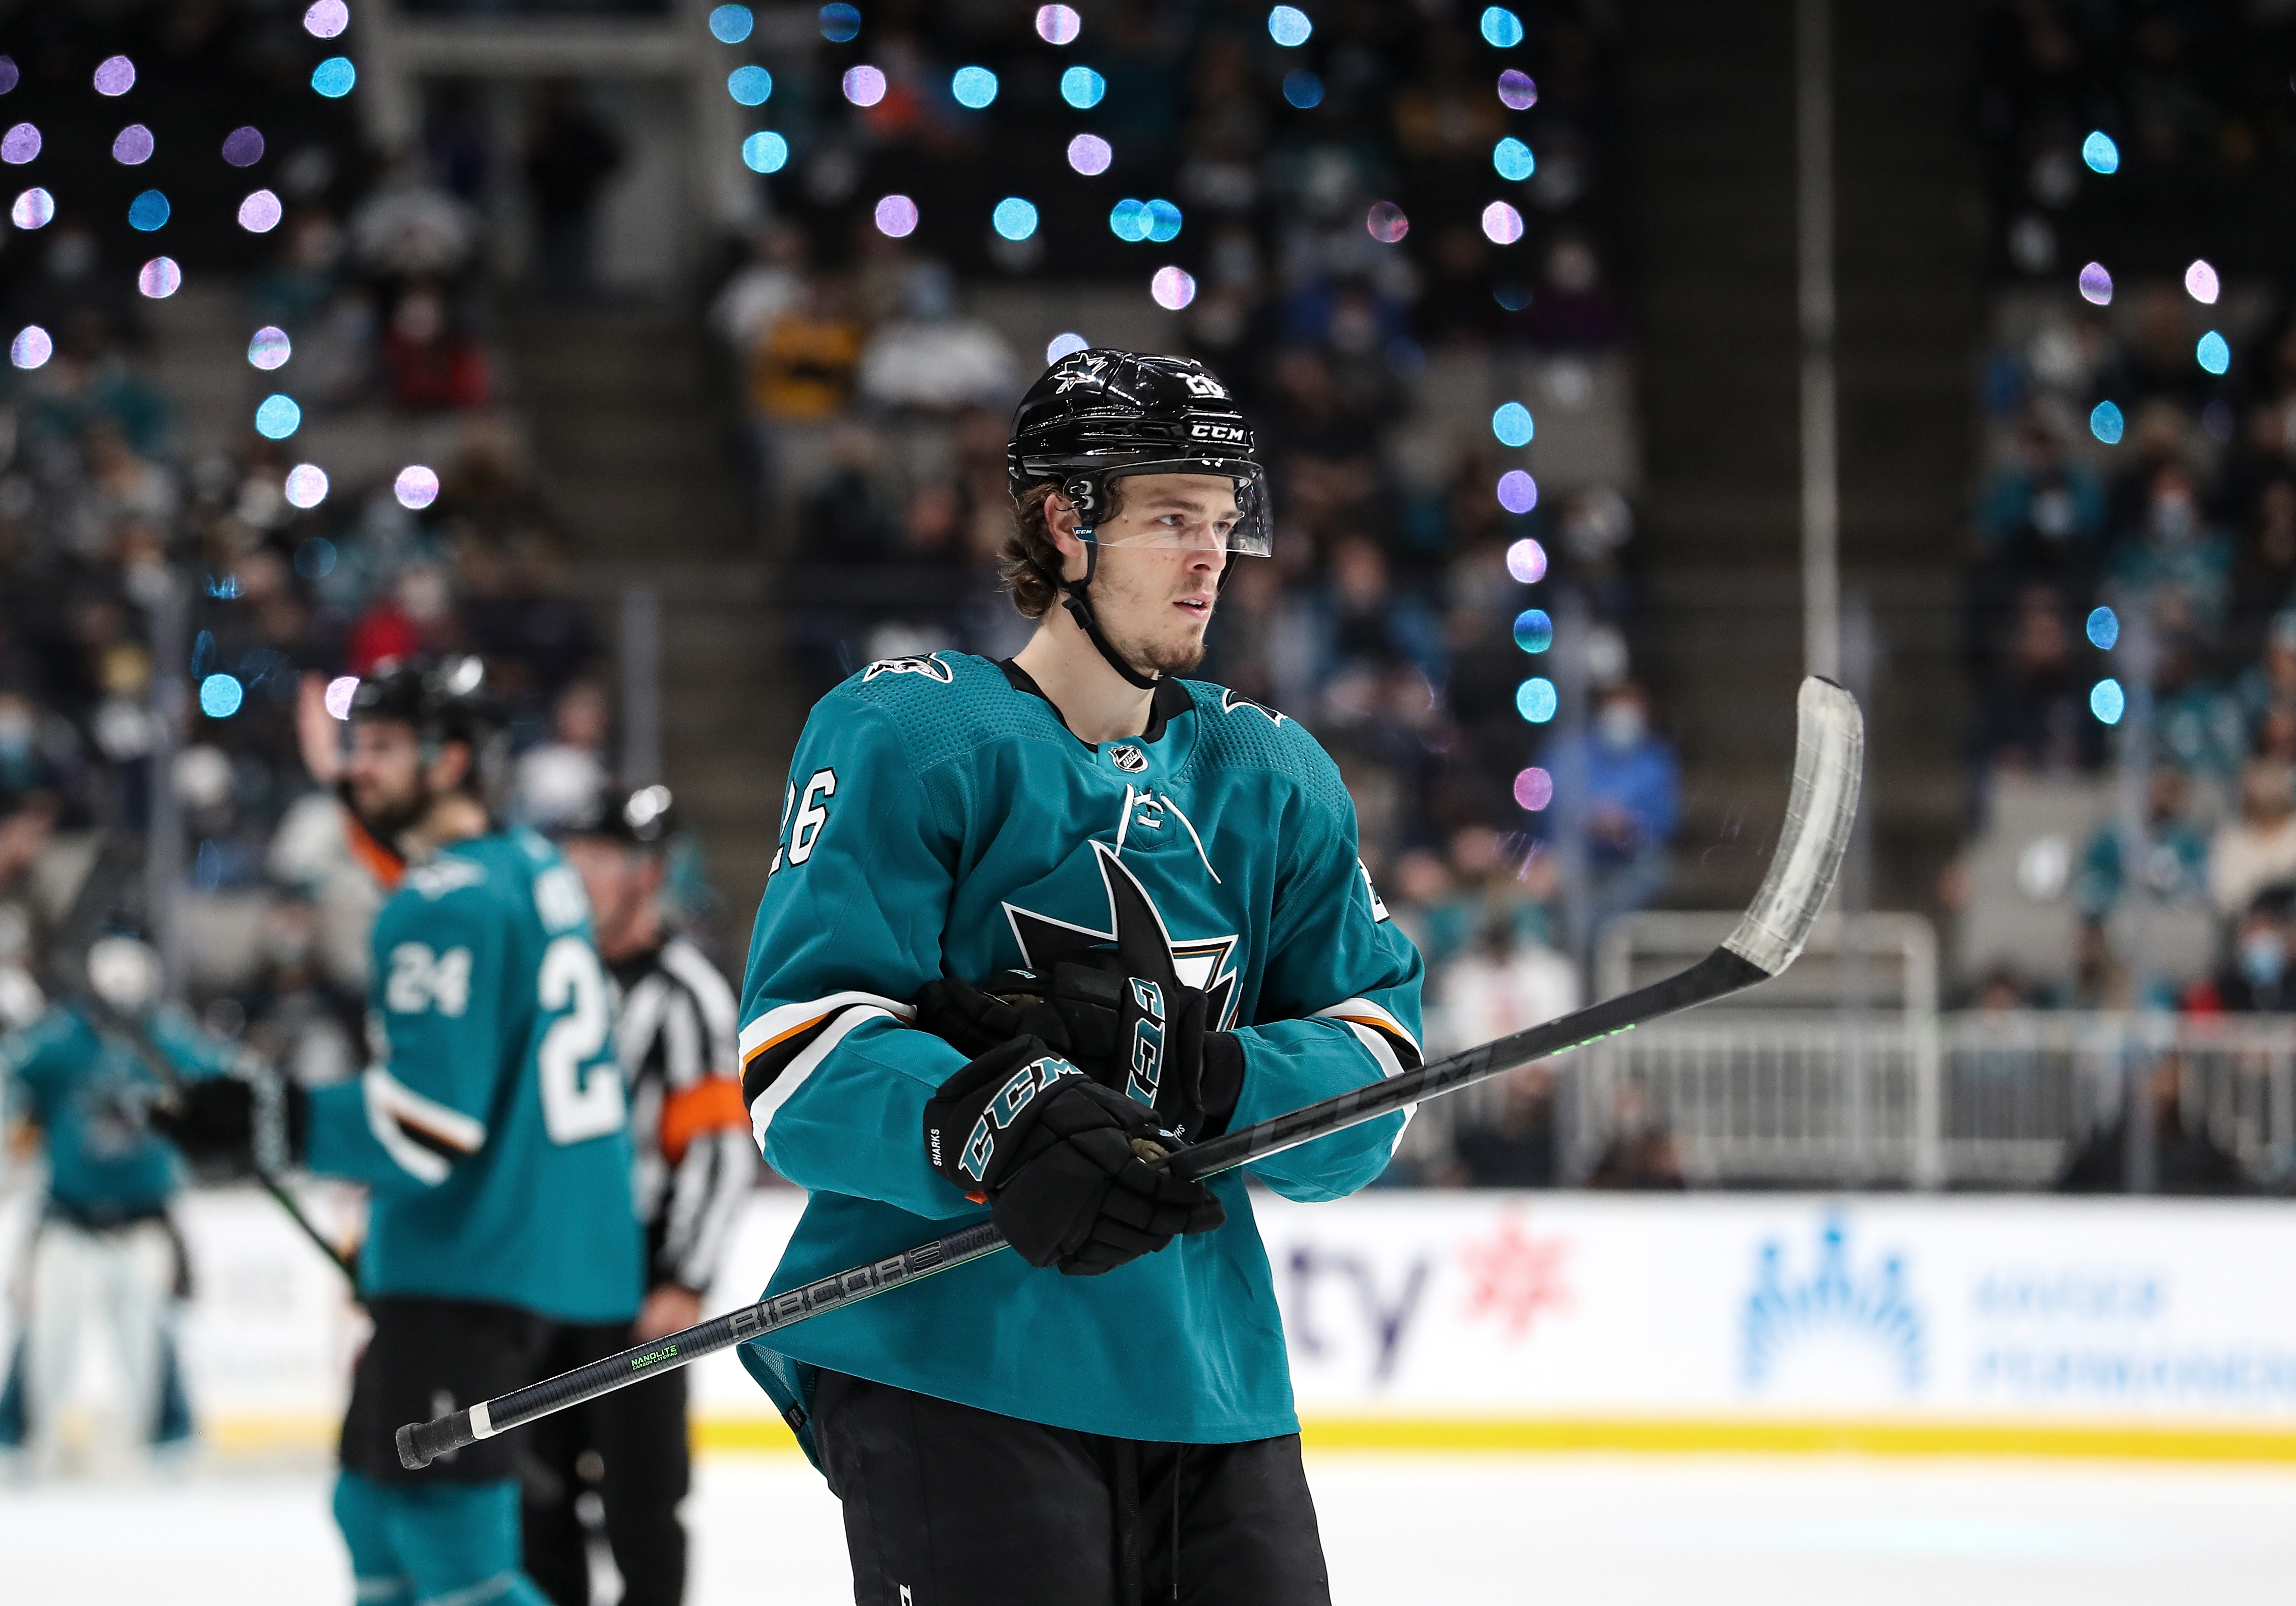 Jasper Weatherby #26 of the San Jose Sharks skates onto the ice for the next play against the Pittsburgh Penguins at SAP Center on January 15, 2022 in San Jose, California.